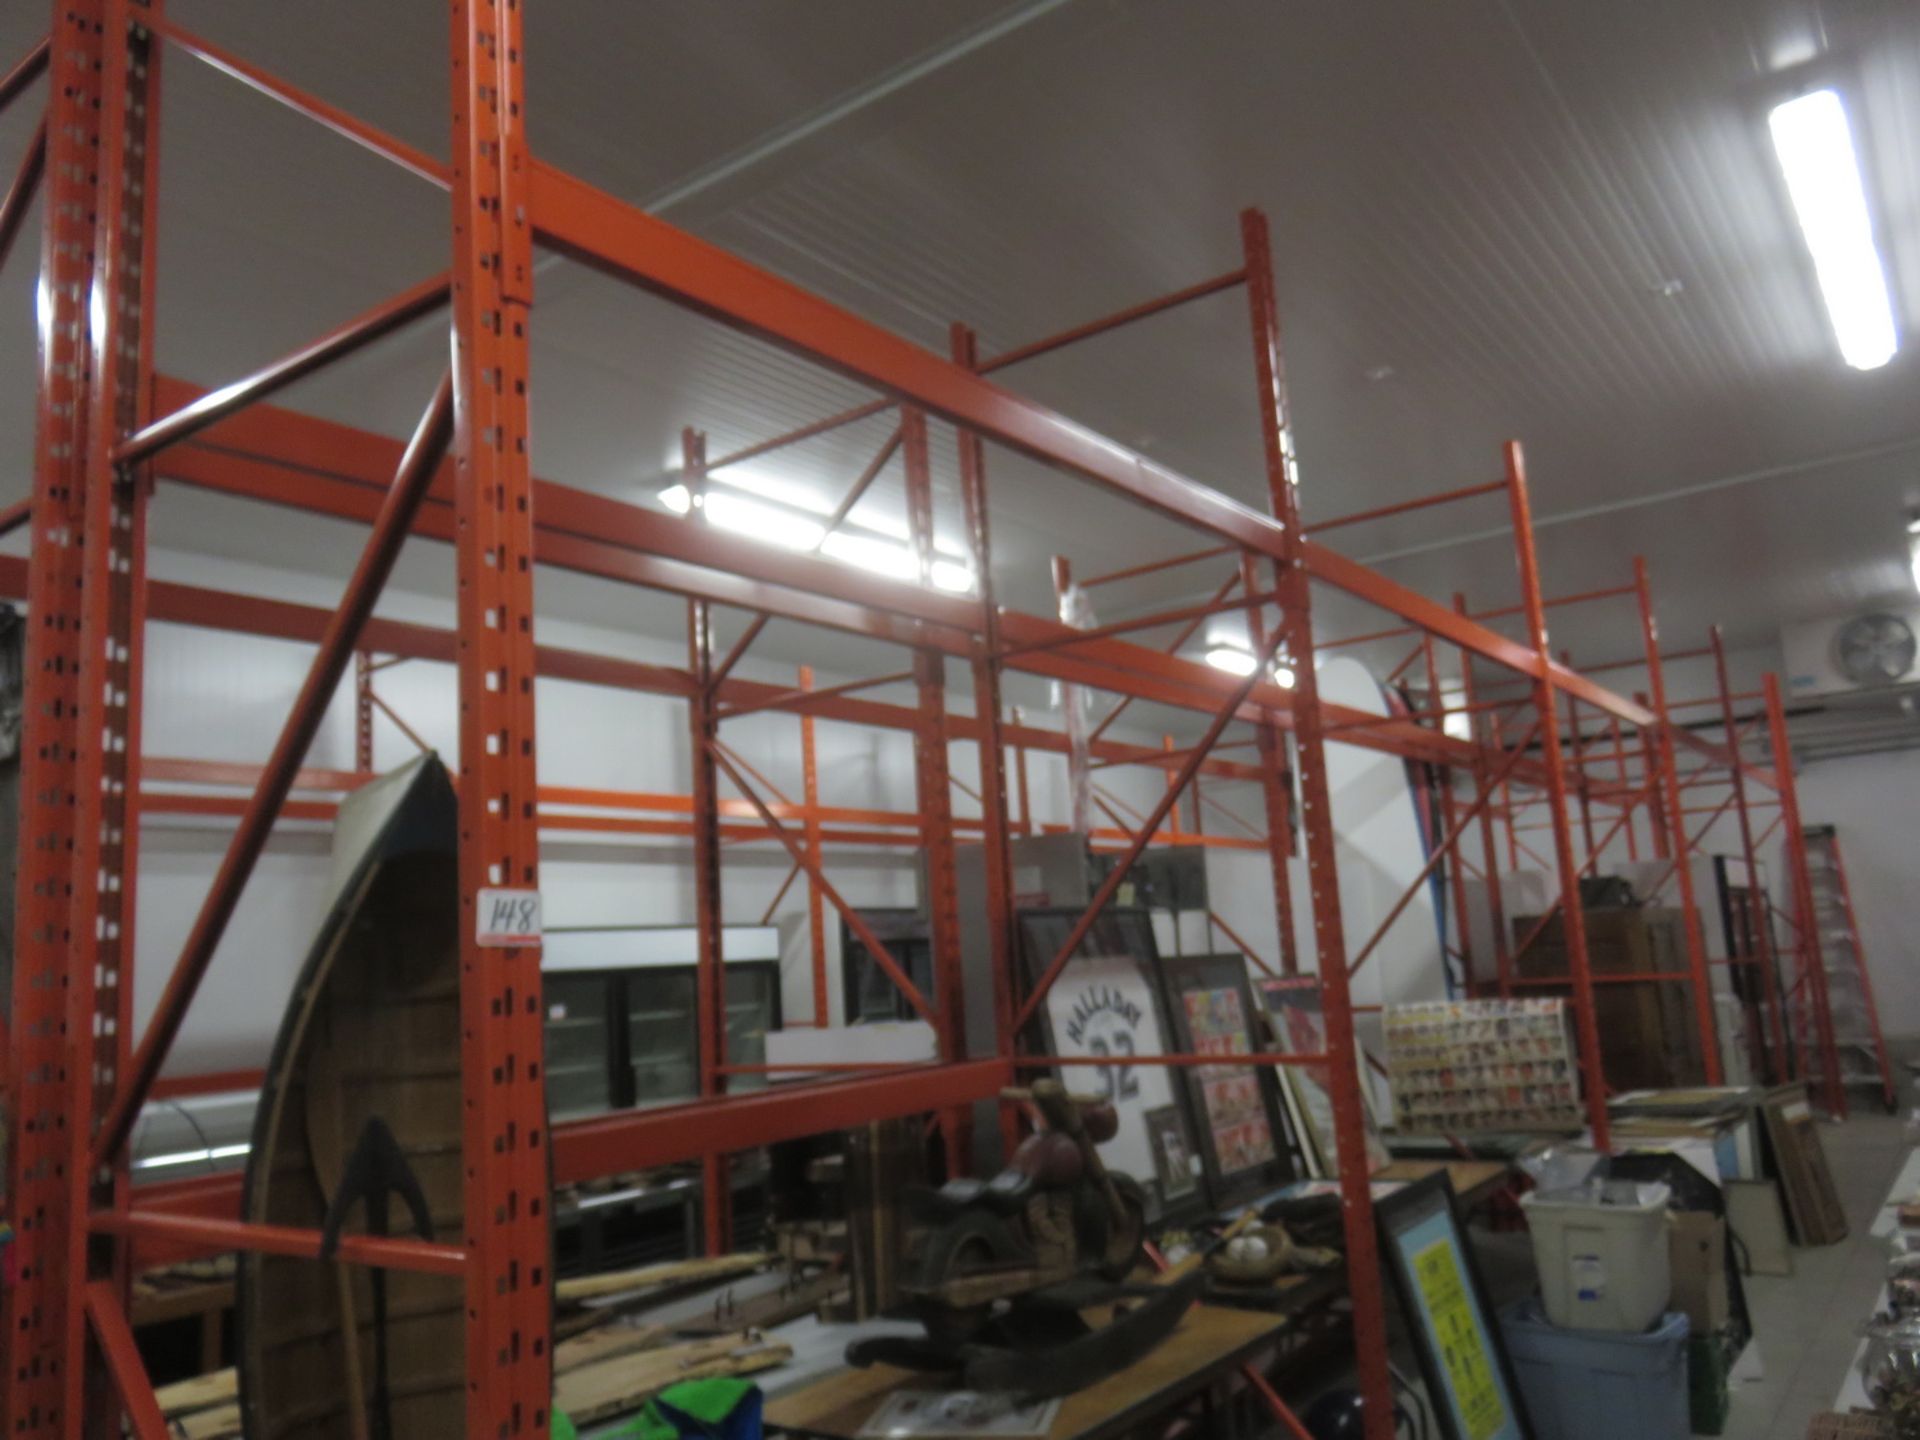 SECTIONS - ORANGE STEEL 42" X 8' X 12'H PALLET RACKING (4 CROSS BEAMS / SECTION) - MUST CUT BOLTS